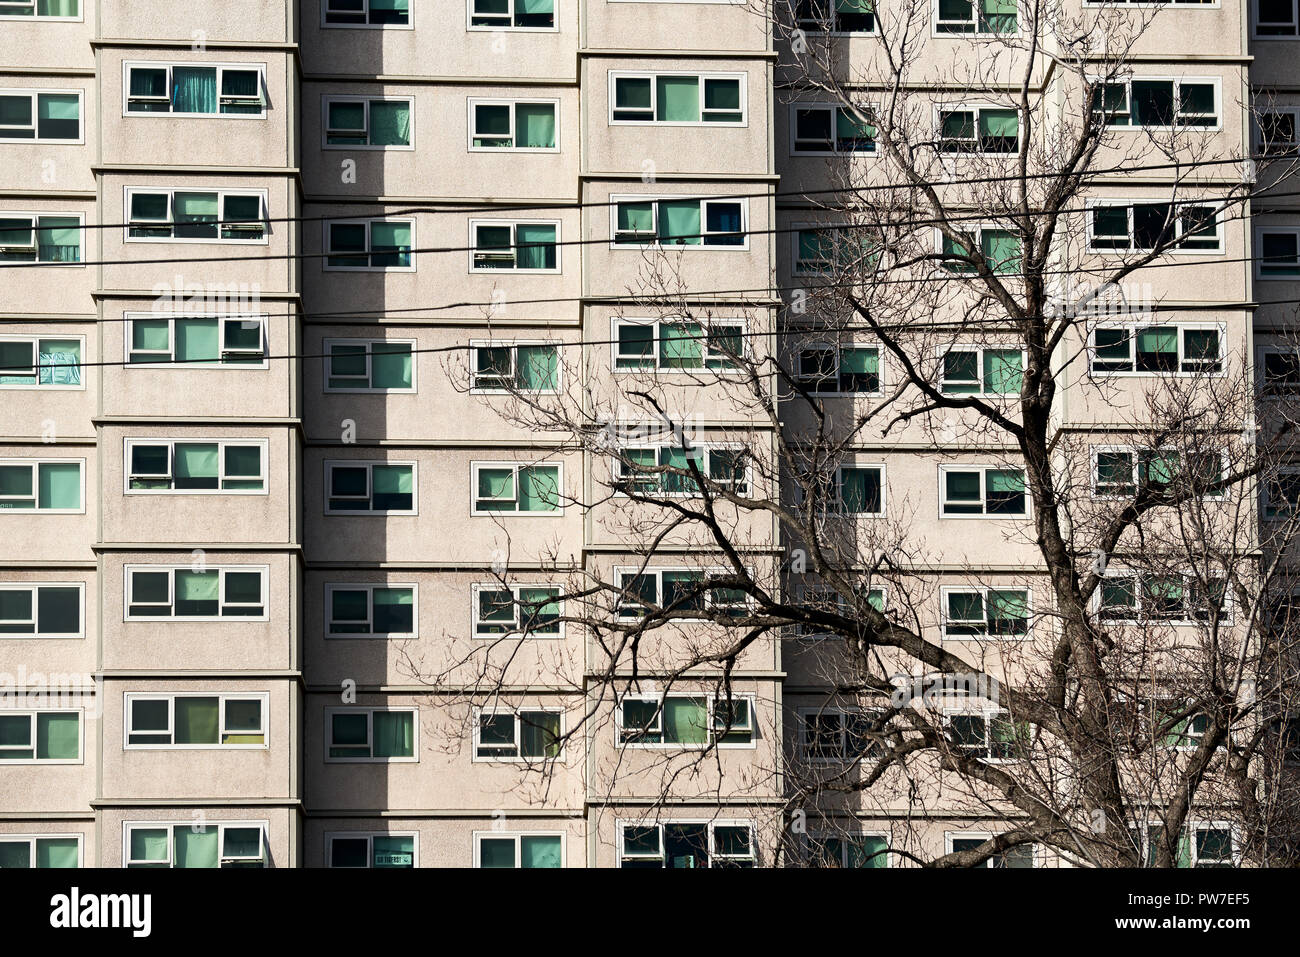 Council apartment block with a leafless tree in front. Stock Photo